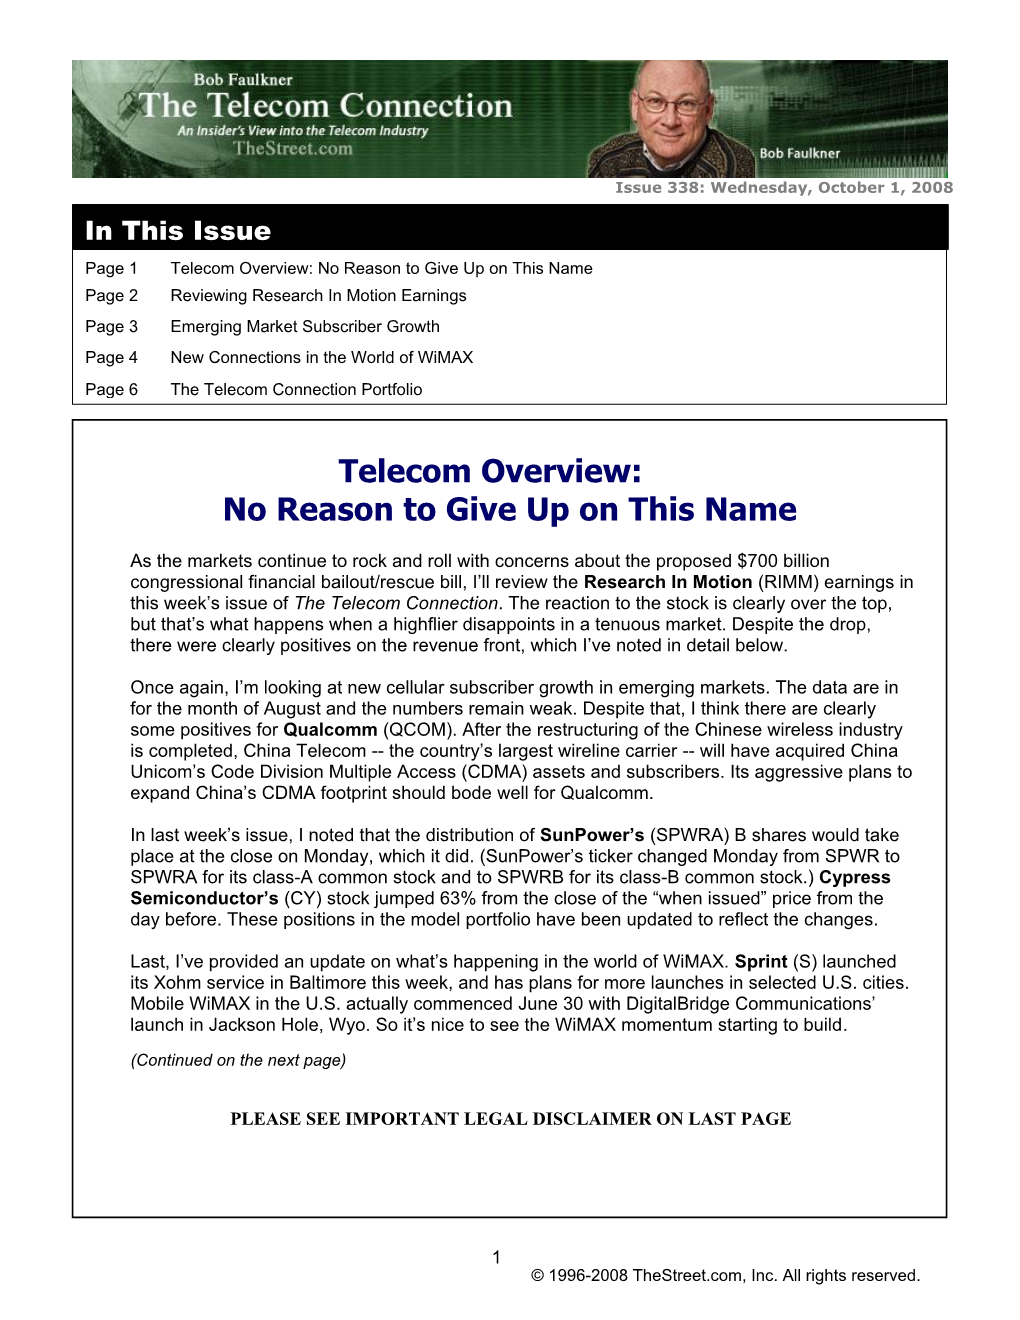 Telecom Overview: No Reason to Give up on This Name Page 2 Reviewing Research in Motion Earnings